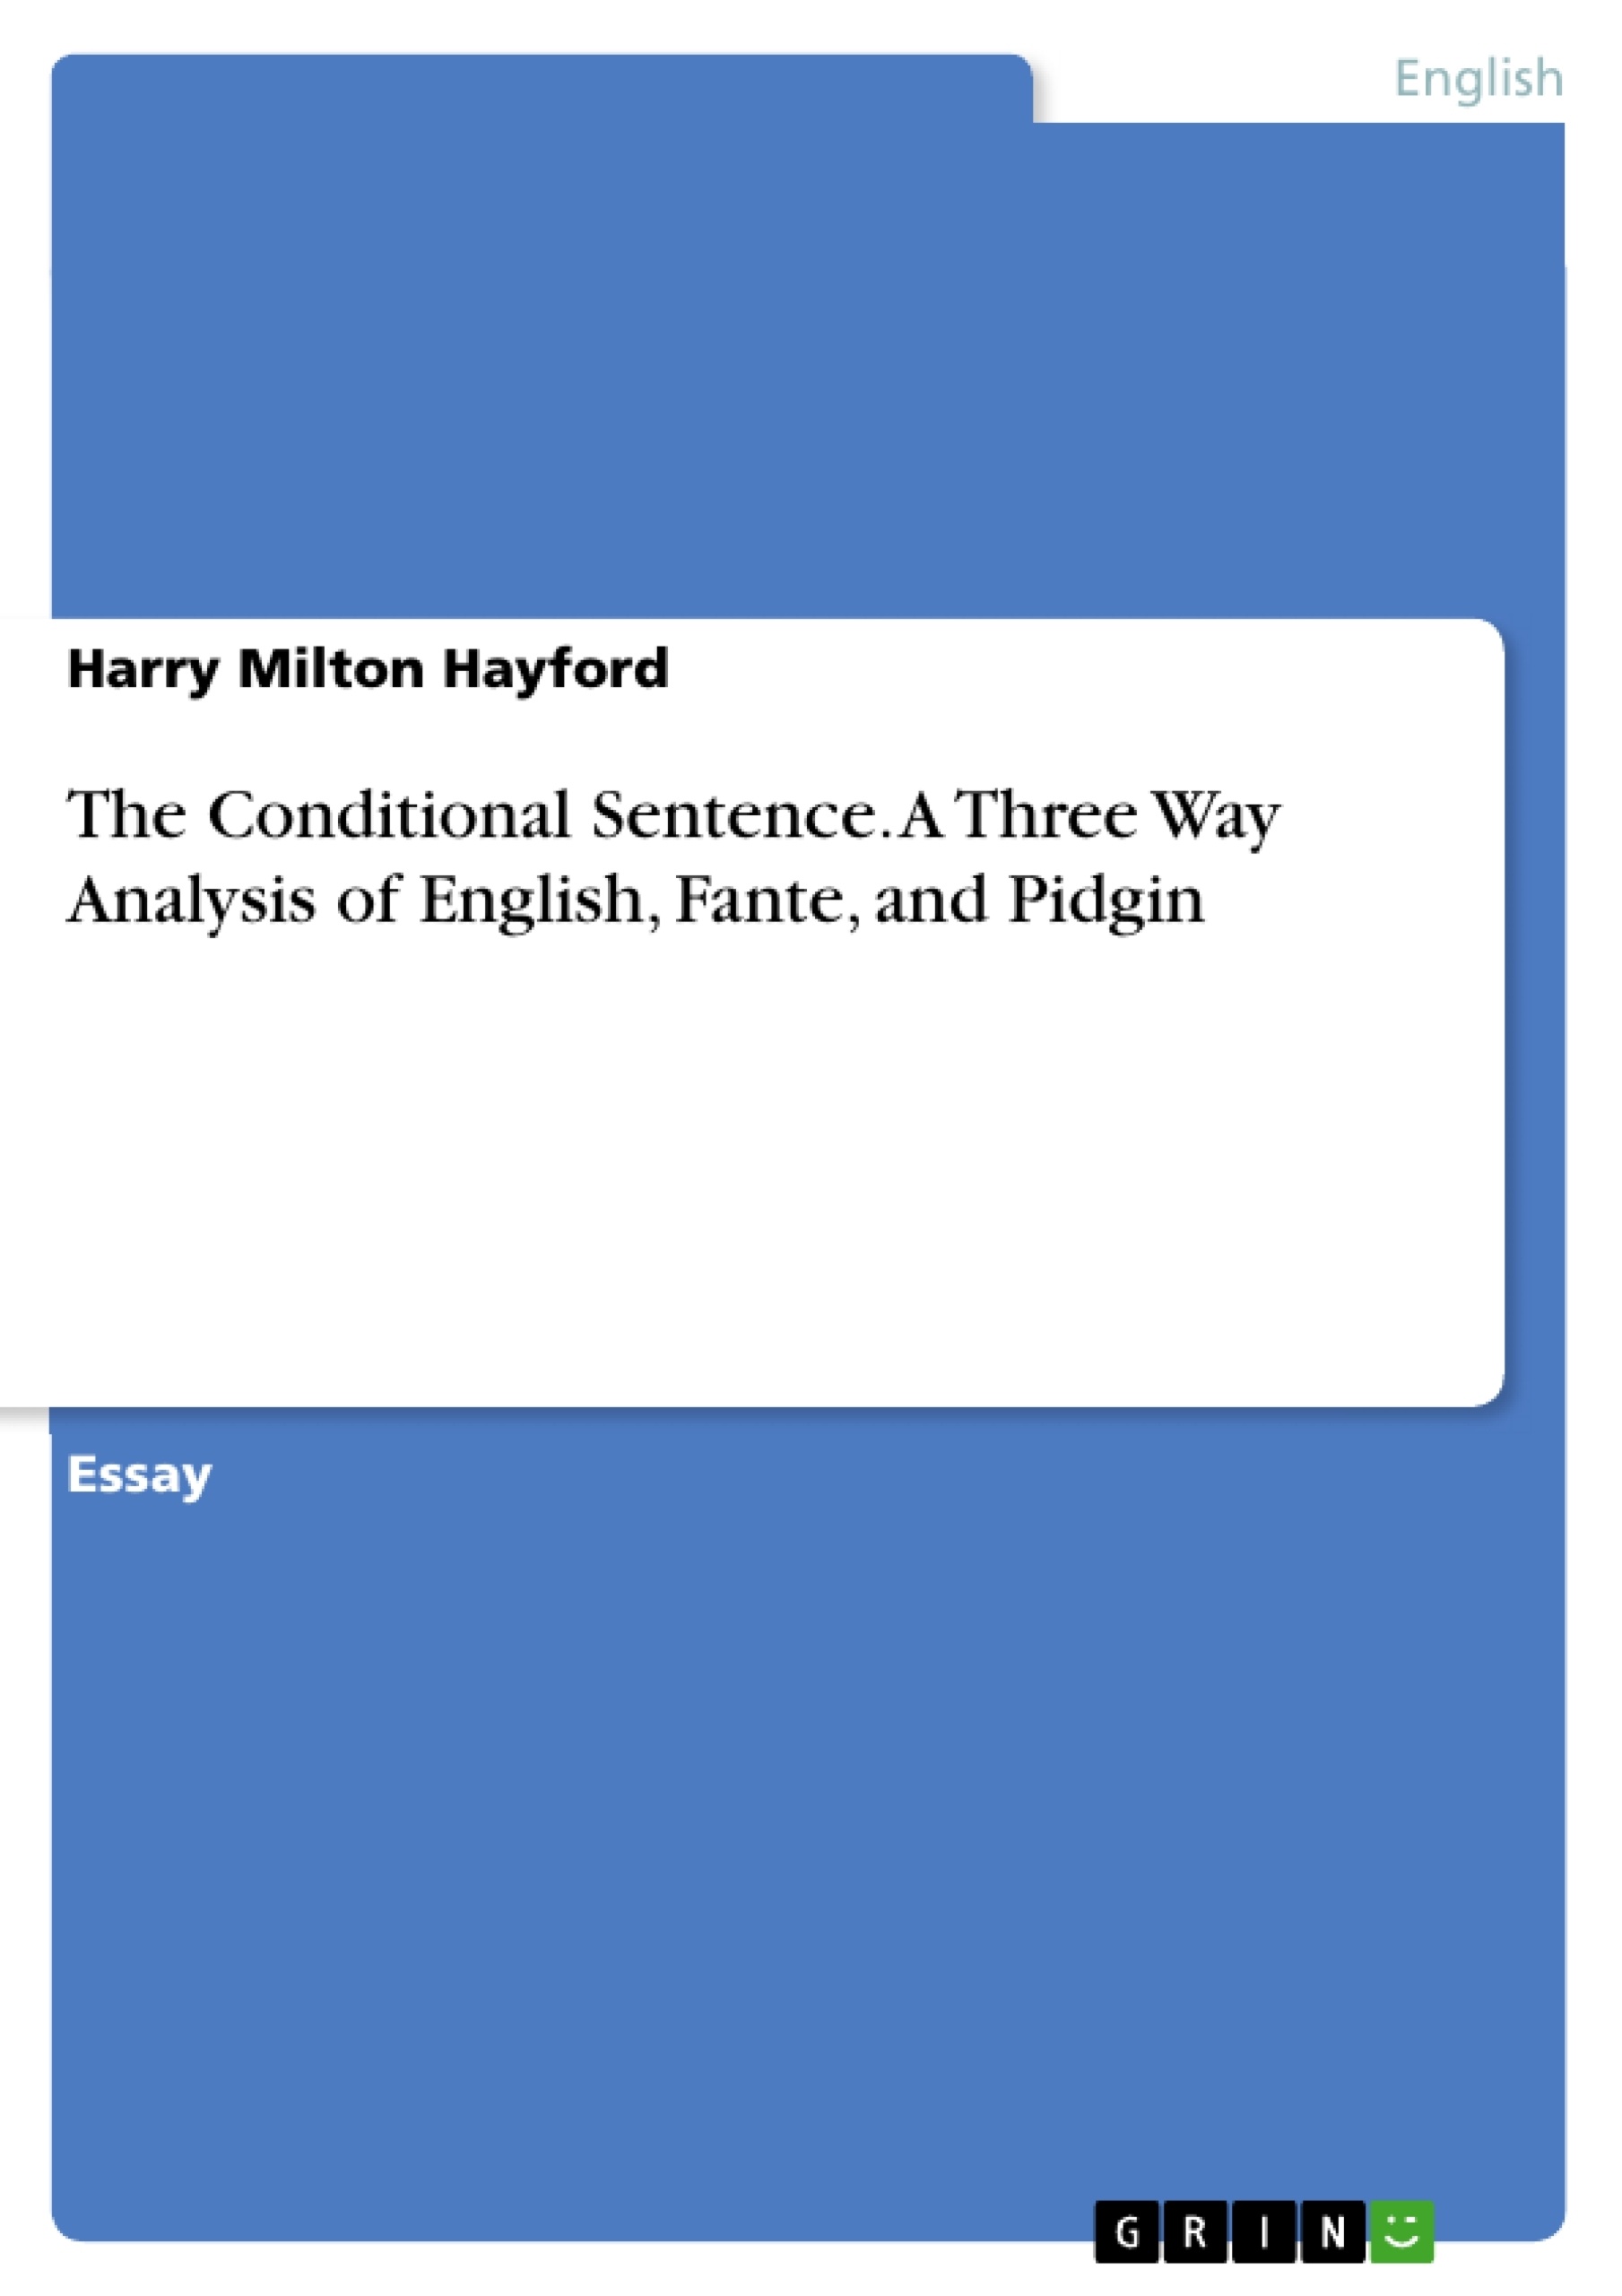 Title: The Conditional Sentence. A Three Way Analysis of English, Fante, and Pidgin